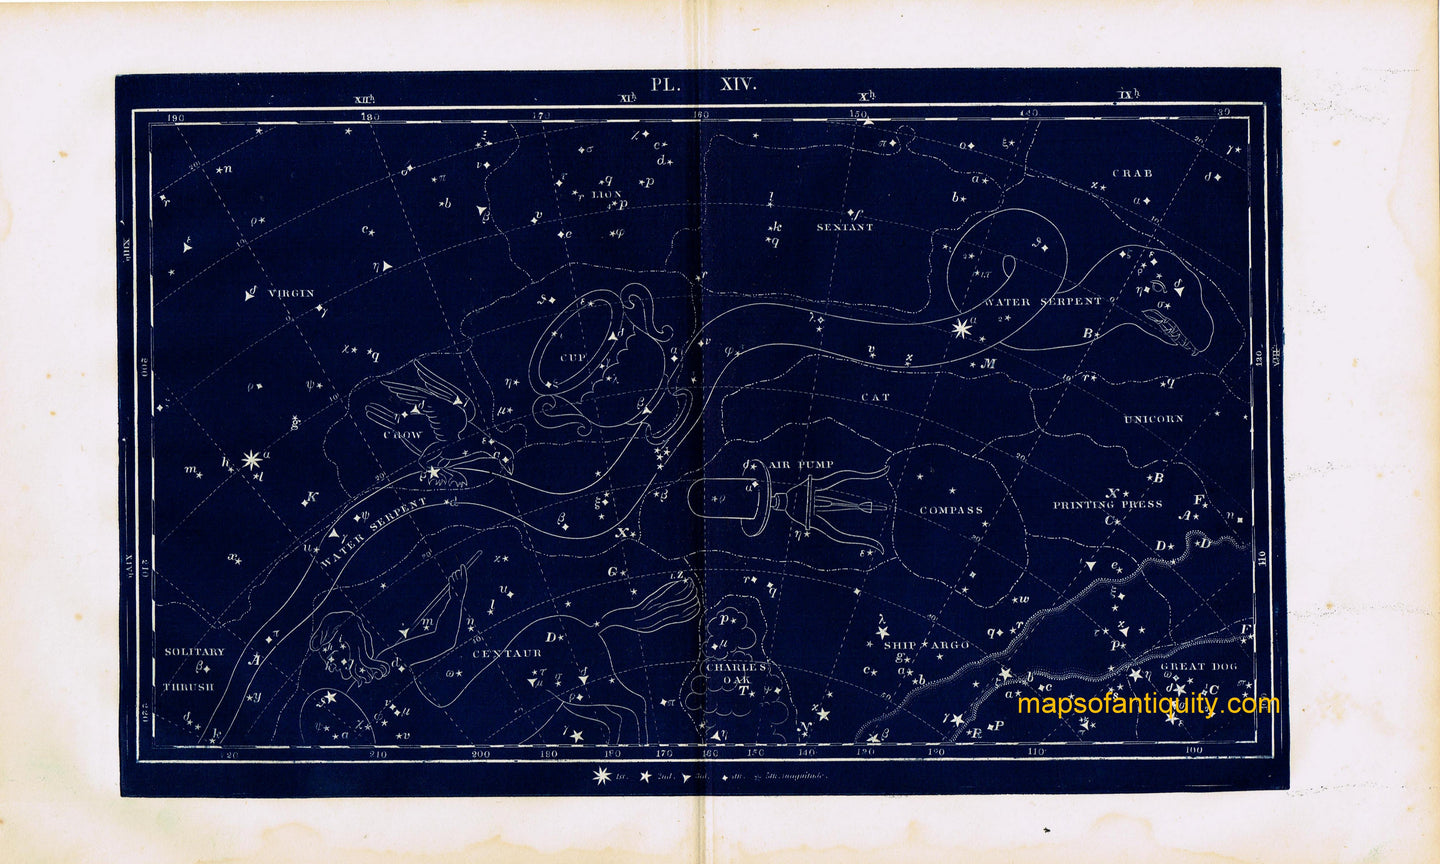 Antique-Printed-Color-Celestial-Map-Plate-XIV-with-the-Water-Serpent-and-the-Centaur-Constellations-******-Celestial--1846-Butler-Maps-Of-Antiquity